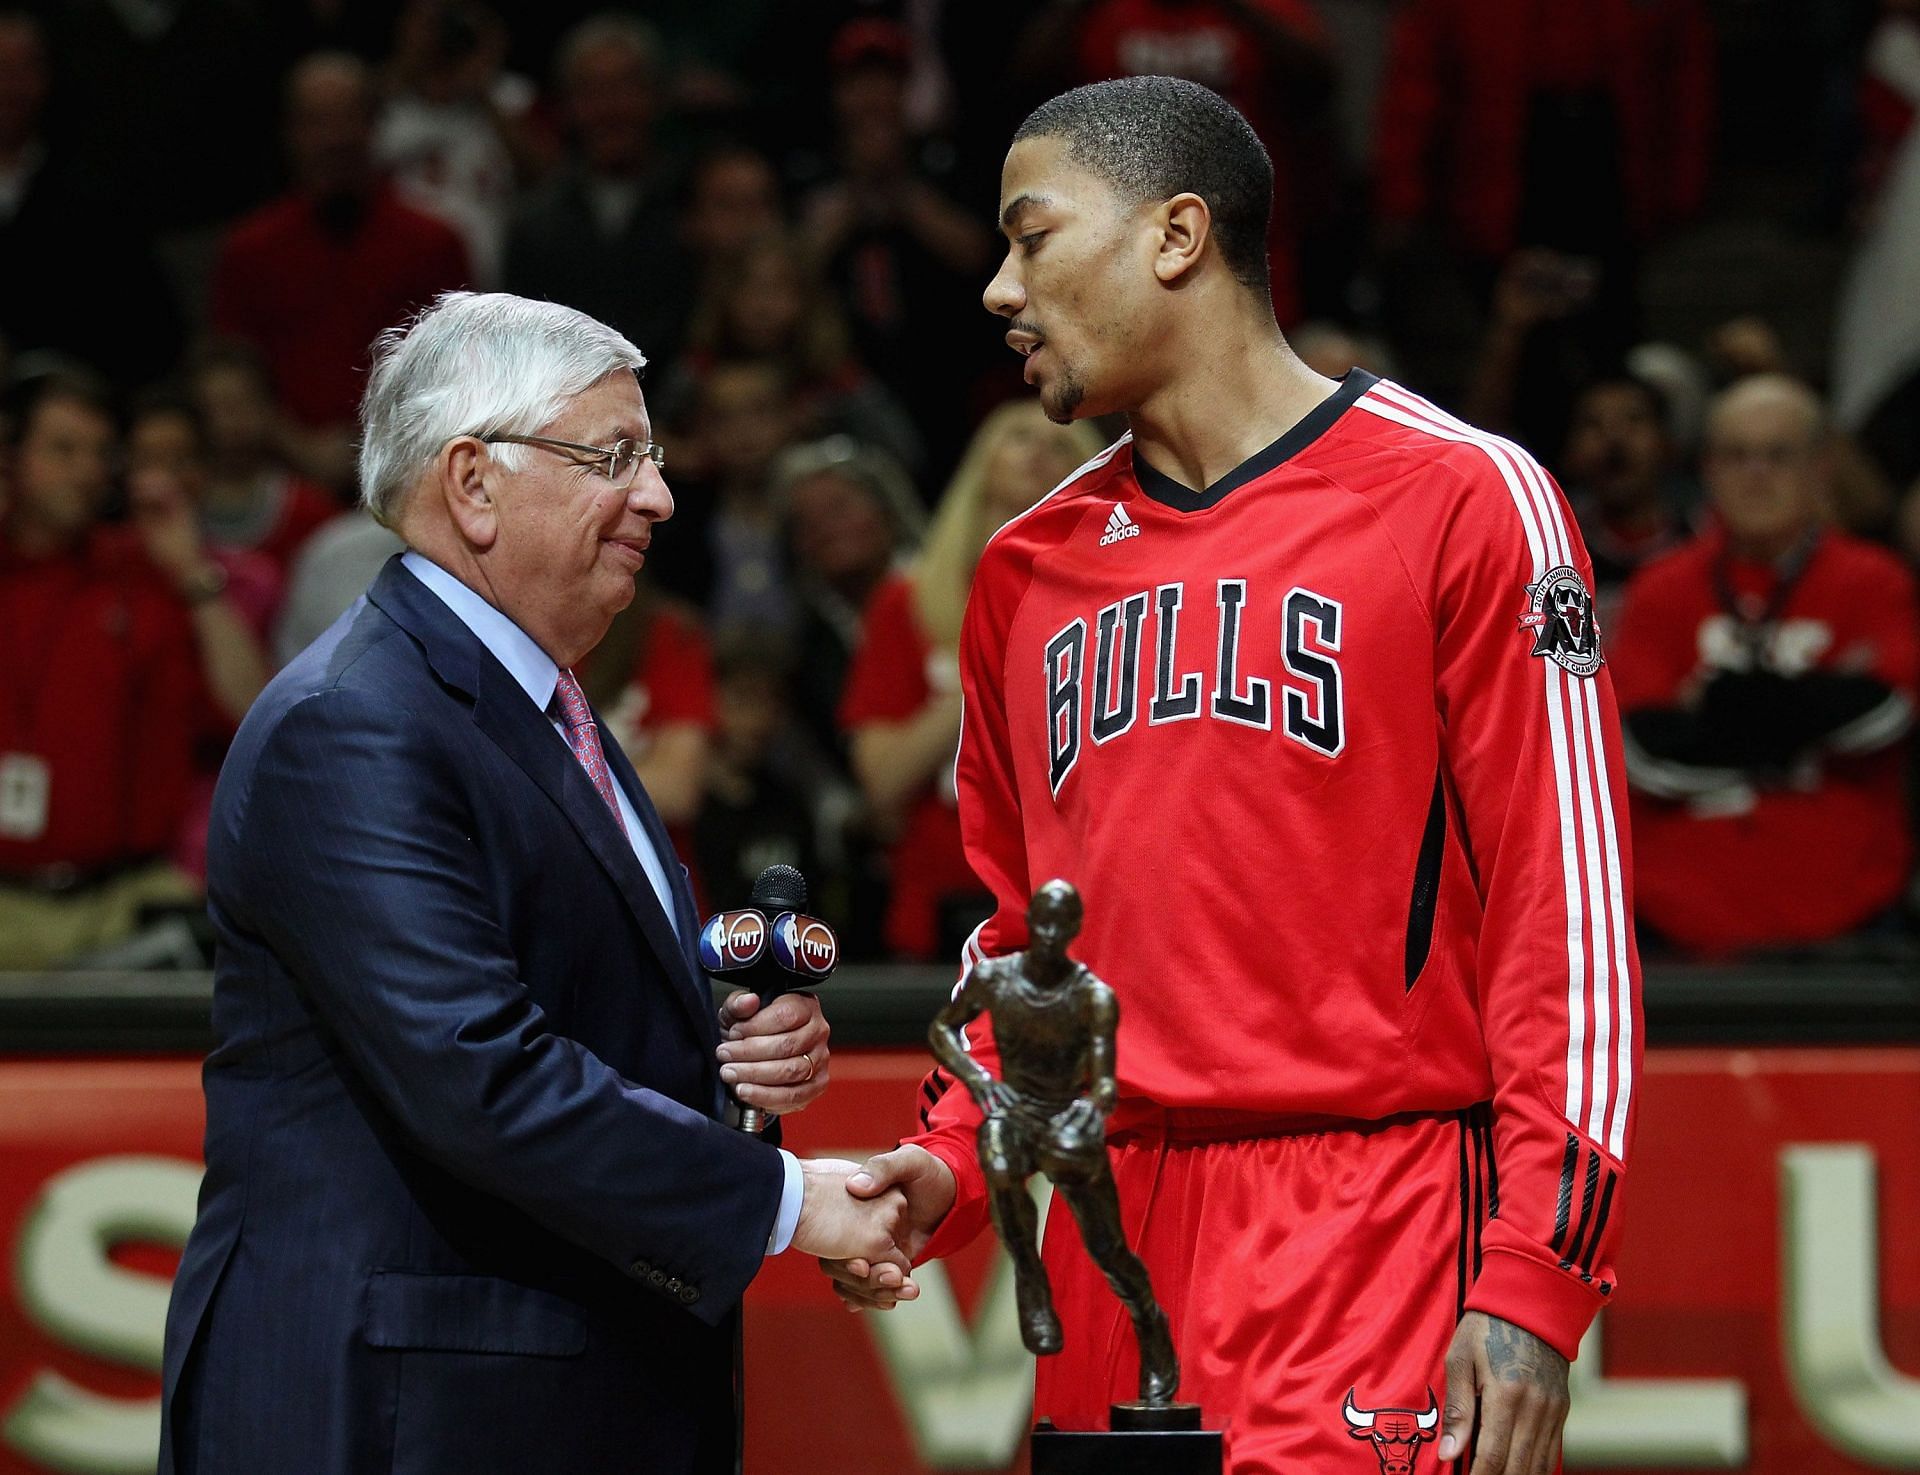 Derrick Rose #1 of the Chicago Bulls accepts the Maurice Podoloff Trophy awarded to the NBA Most Valuable Player from Commissoner David Stern